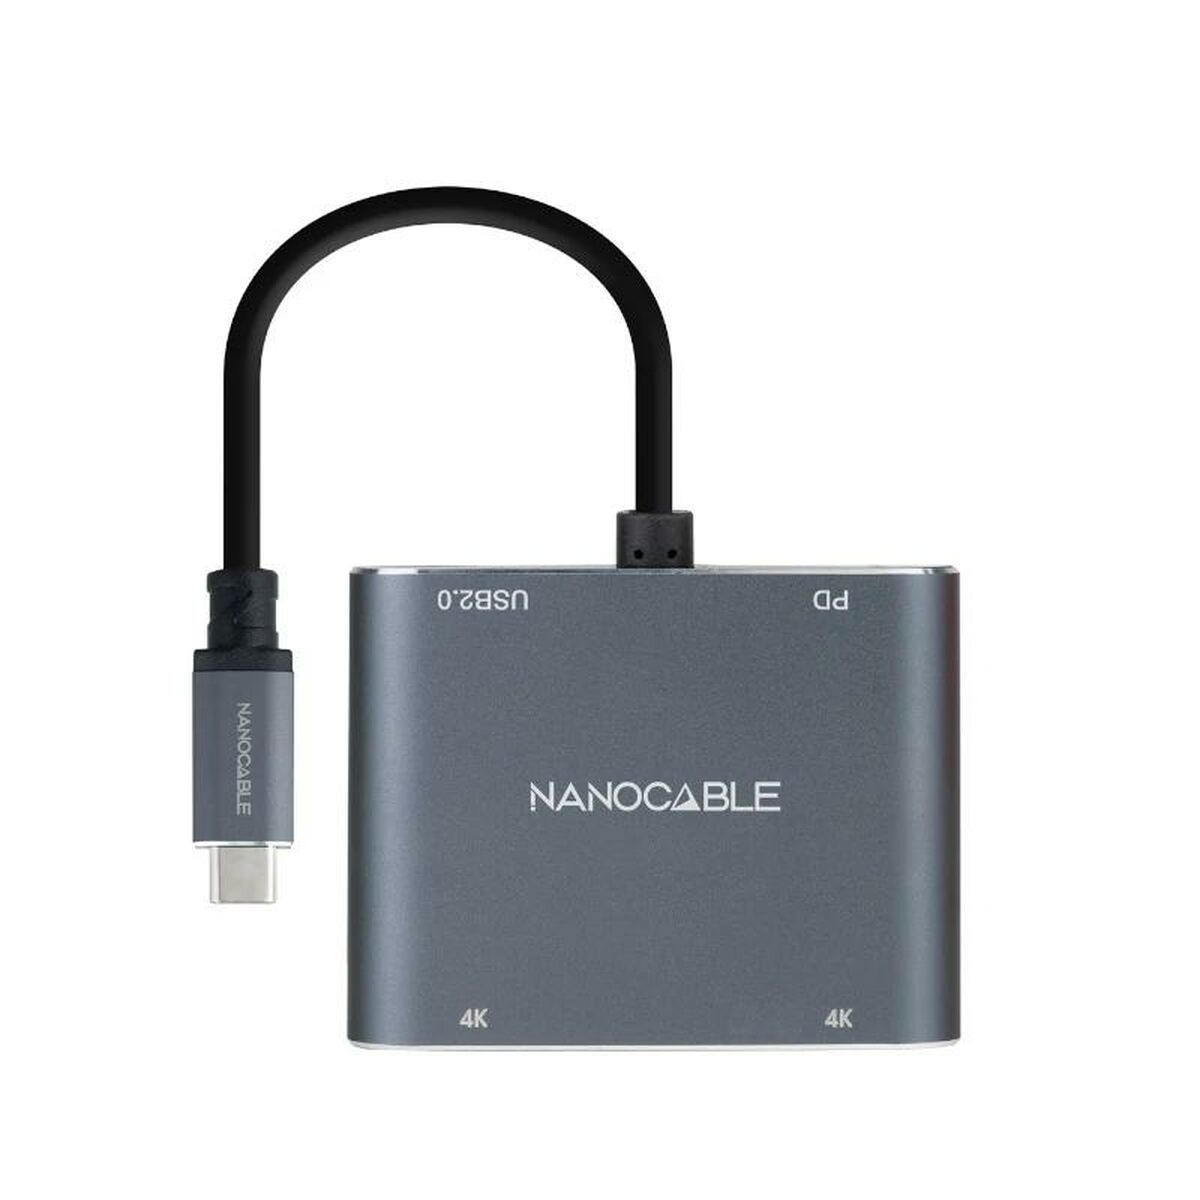 USB C to HDMI Adapter NANOCABLE 10.16.4305 4K Ultra HD Grey 15 cm